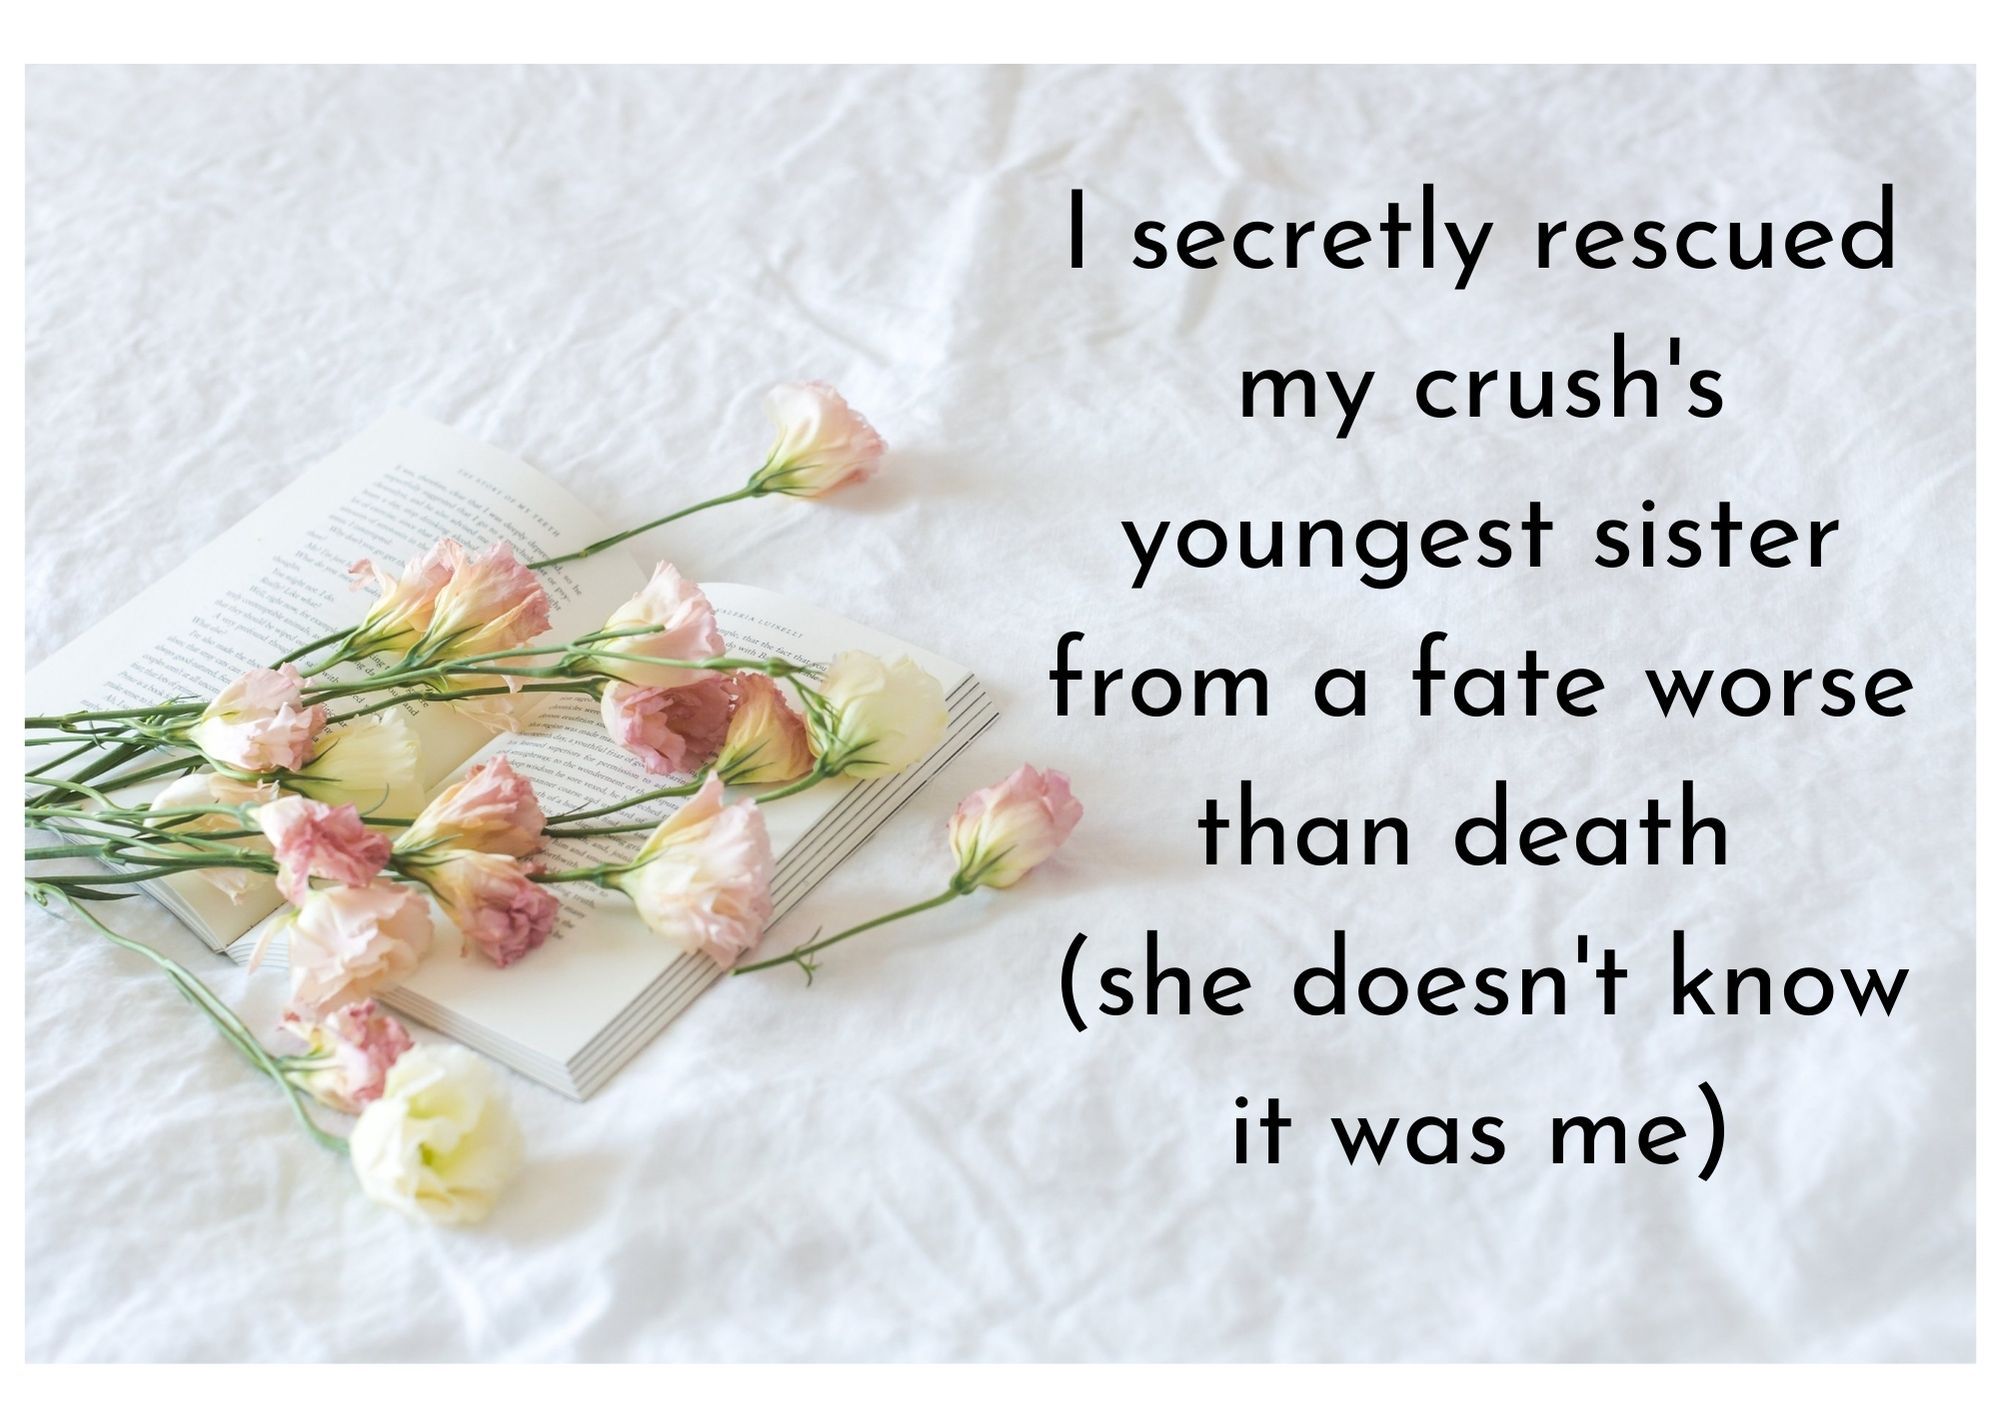 roses on a white sheet with the words "I secretly rescued my crush's youngest sister from a fate worse than death (she doesn't know it was me)